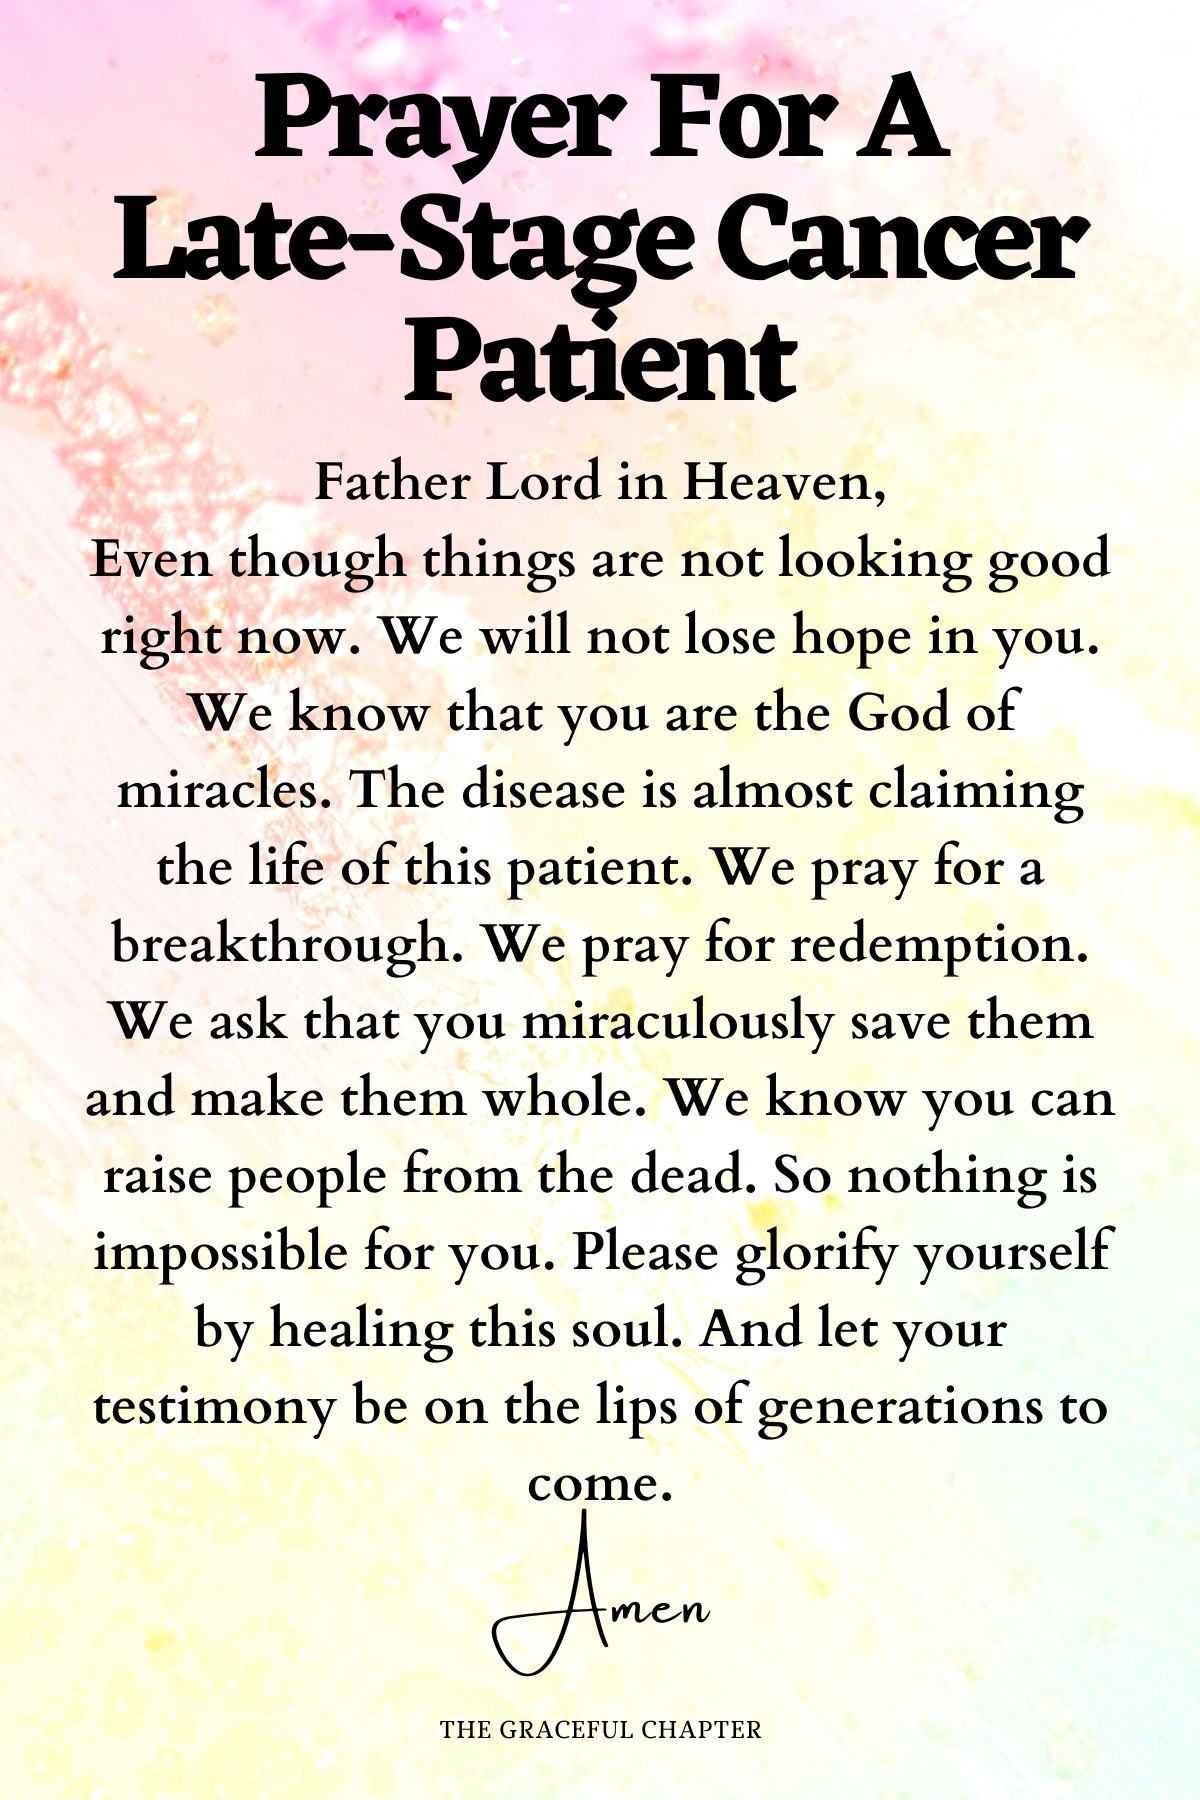 Prayer For A Late-Stage Cancer Patient